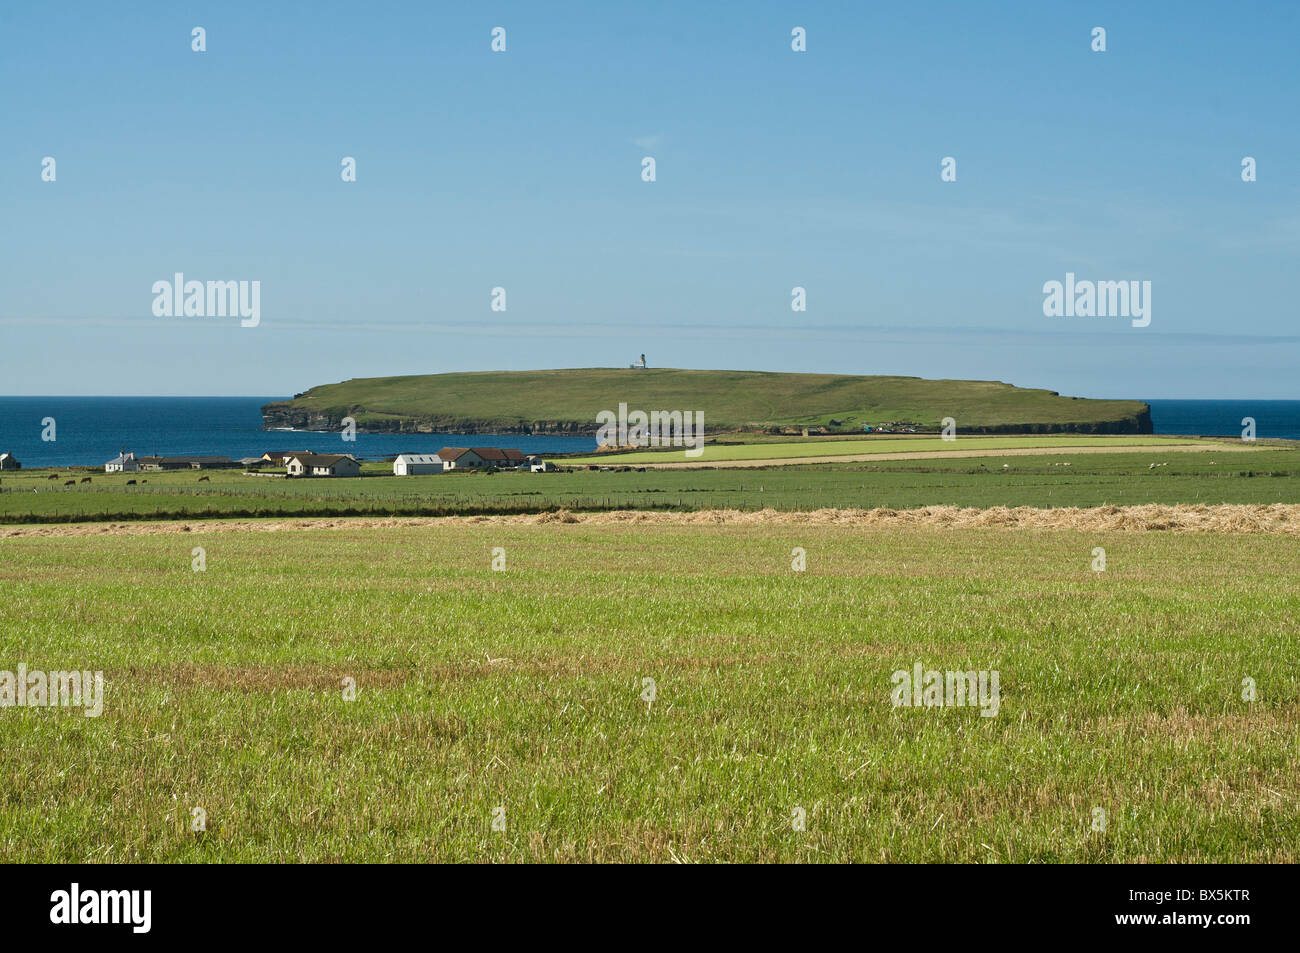 dh Brough of Birsay BIRSAY ORKNEY Birsay fields and Brough of Birsay lighthouse Stock Photo